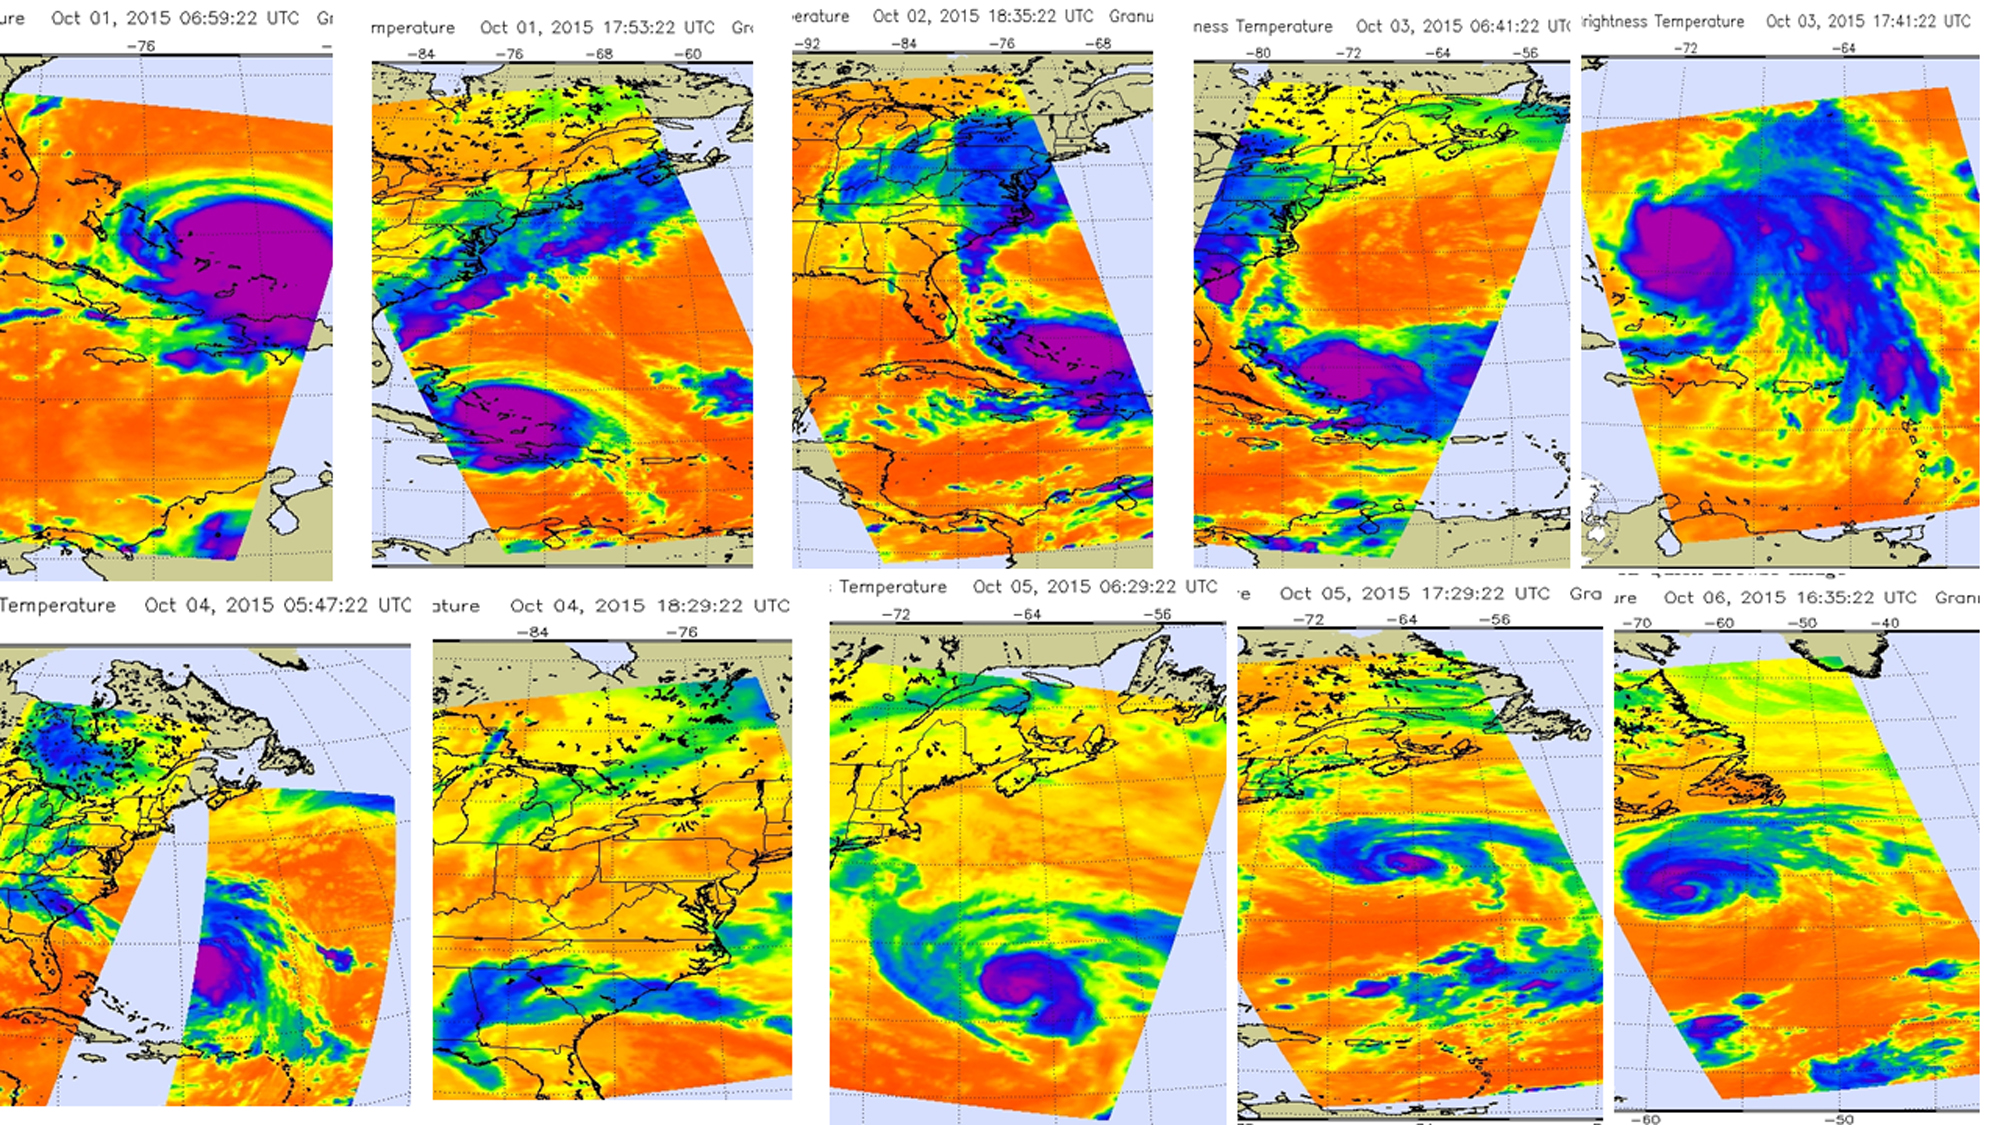 Series of infrared images of Hurricane Joaquin from Oct. 1-6